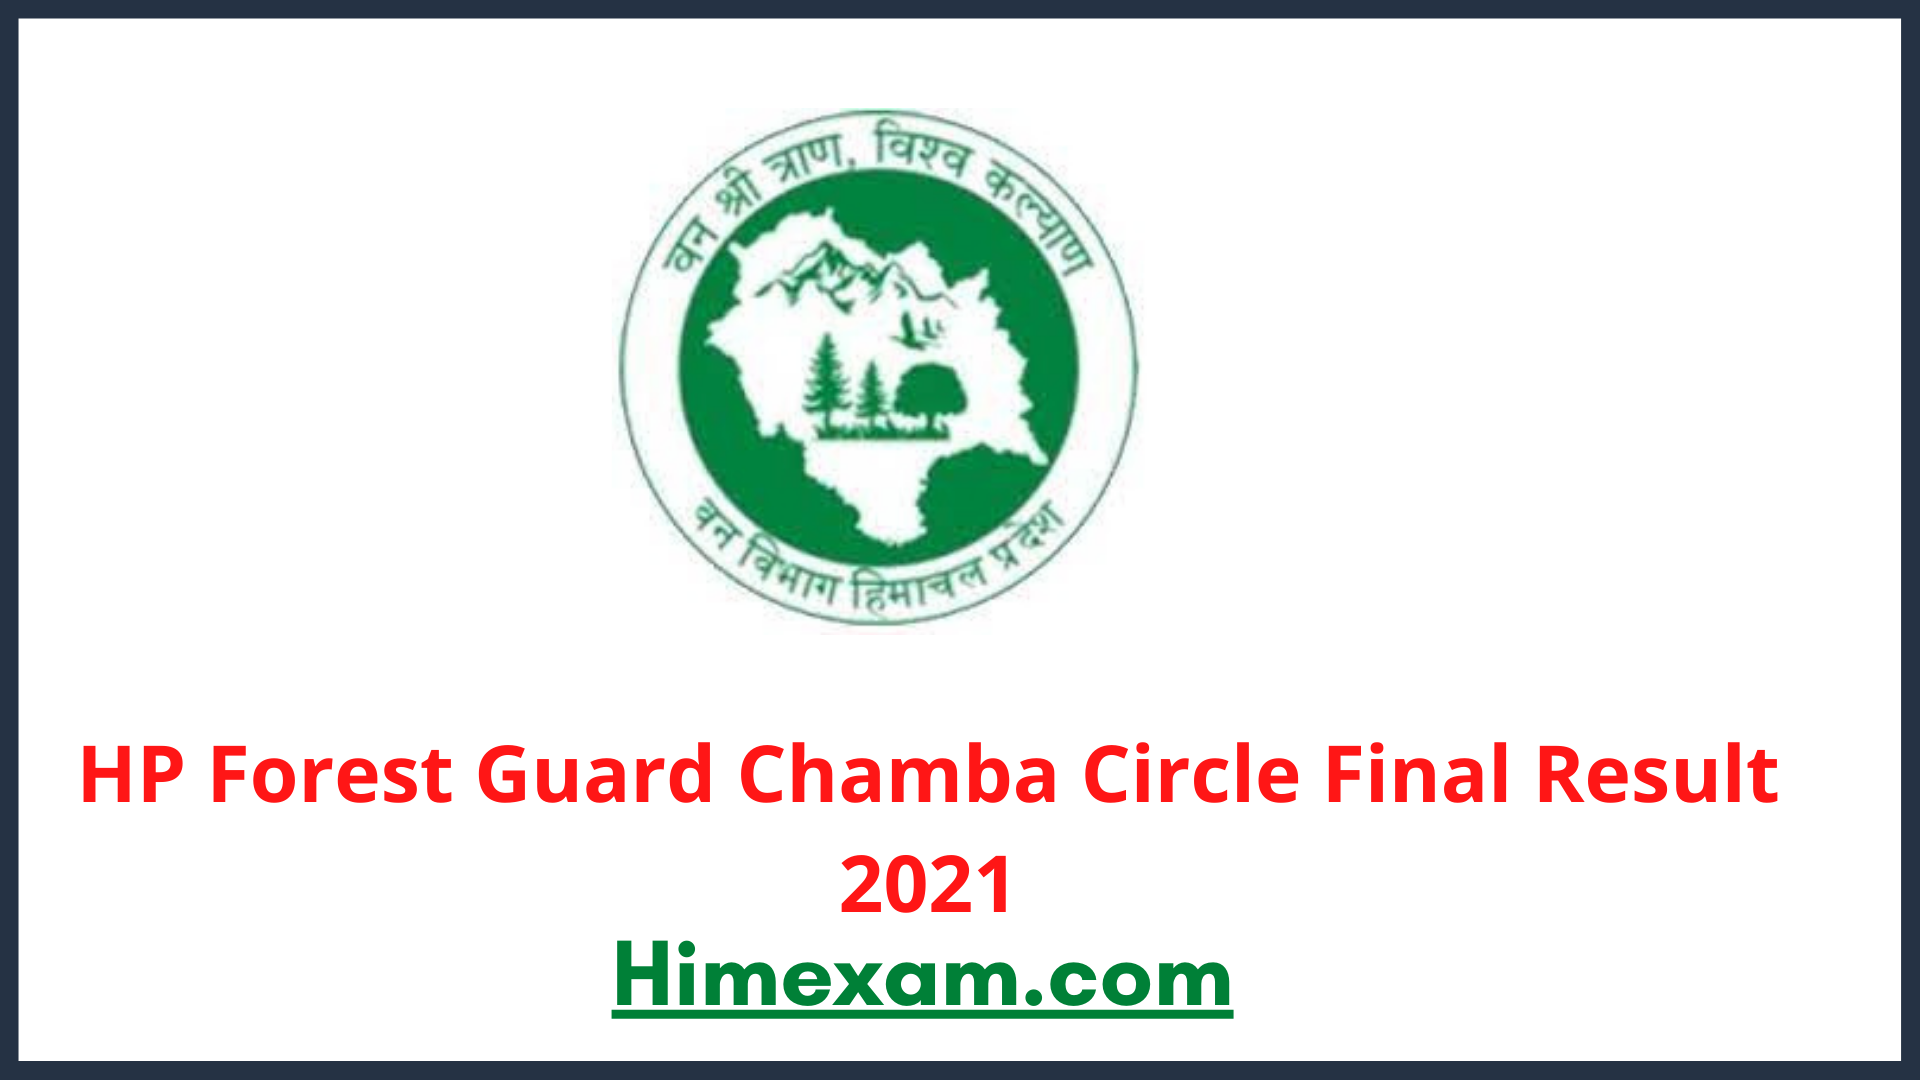 HP Forest Guard Chamba Circle Final Result 2021